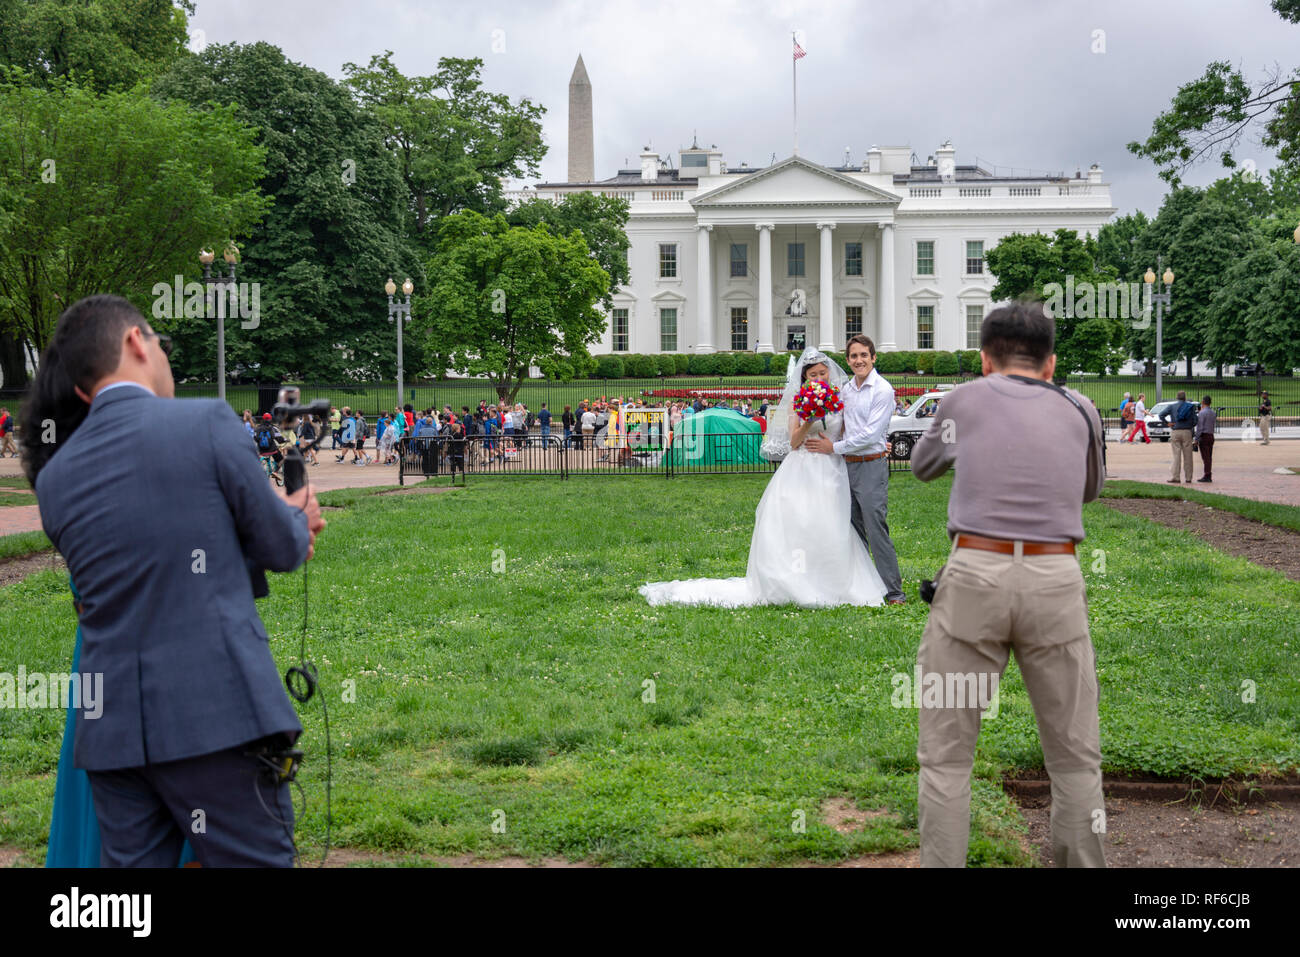 A bride and groom having wedding photographs taken in front of the White House, Washington DC USA Stock Photo